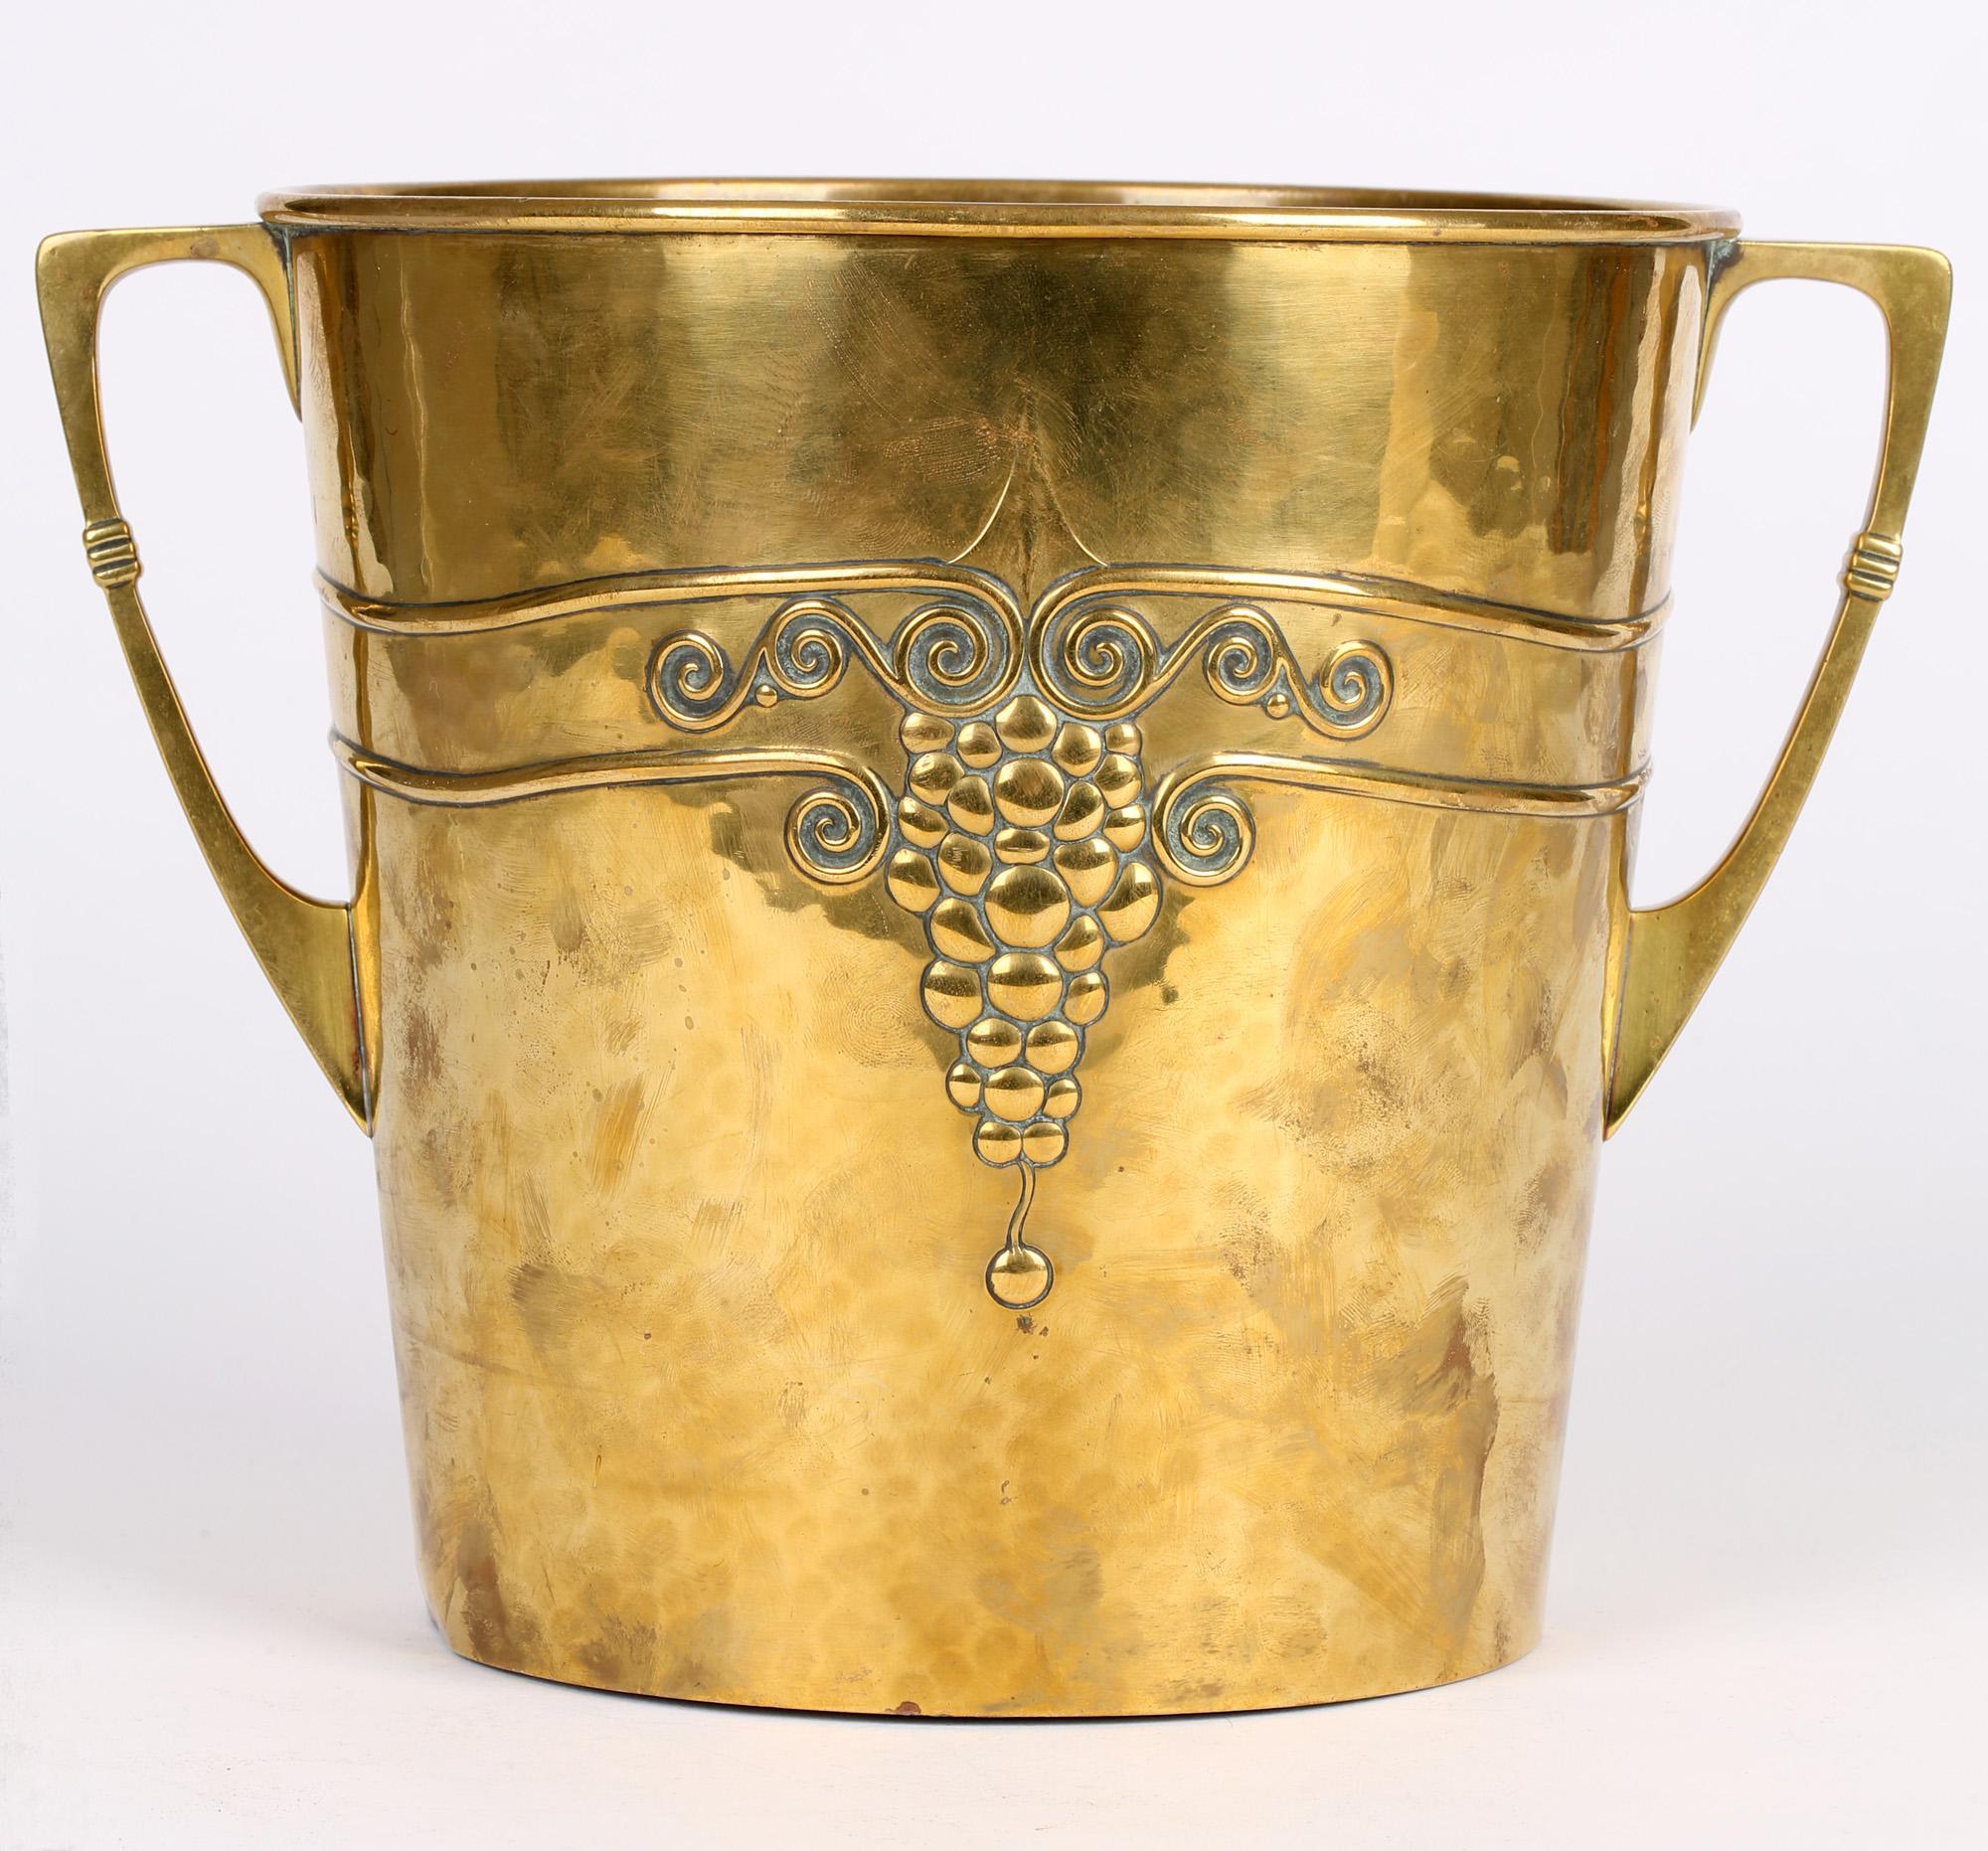 A stylish German Jugendstil (Art Nouveau) brass twin handled ice bucket made by WMF (Württembergische Metallwarenfabrik) and dating from circa 1905. The ice bucket is of wide rounded shape with handles applied to either side and with a hammerec